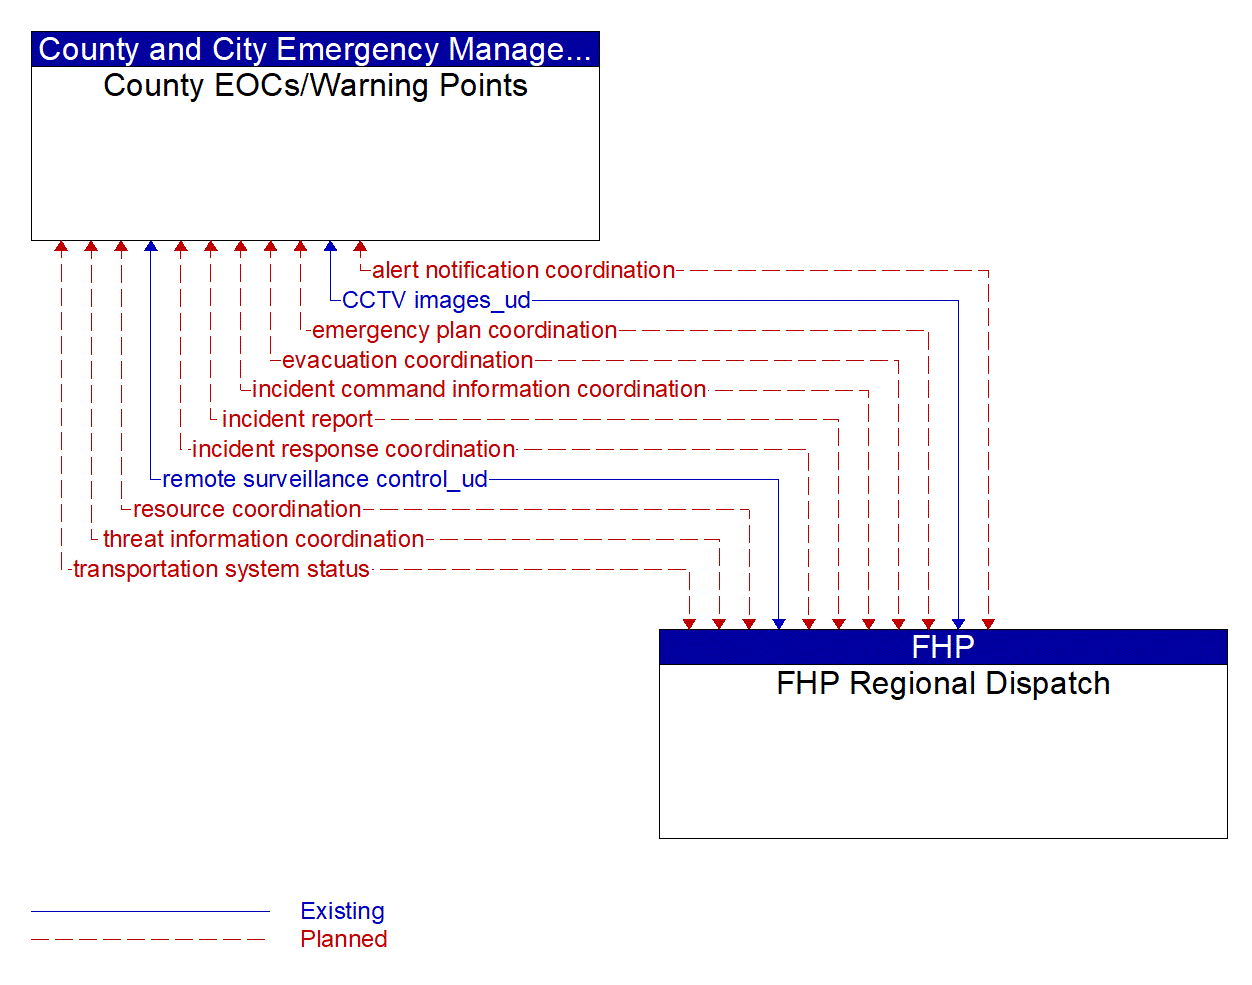 Architecture Flow Diagram: FHP Regional Dispatch <--> County EOCs/Warning Points